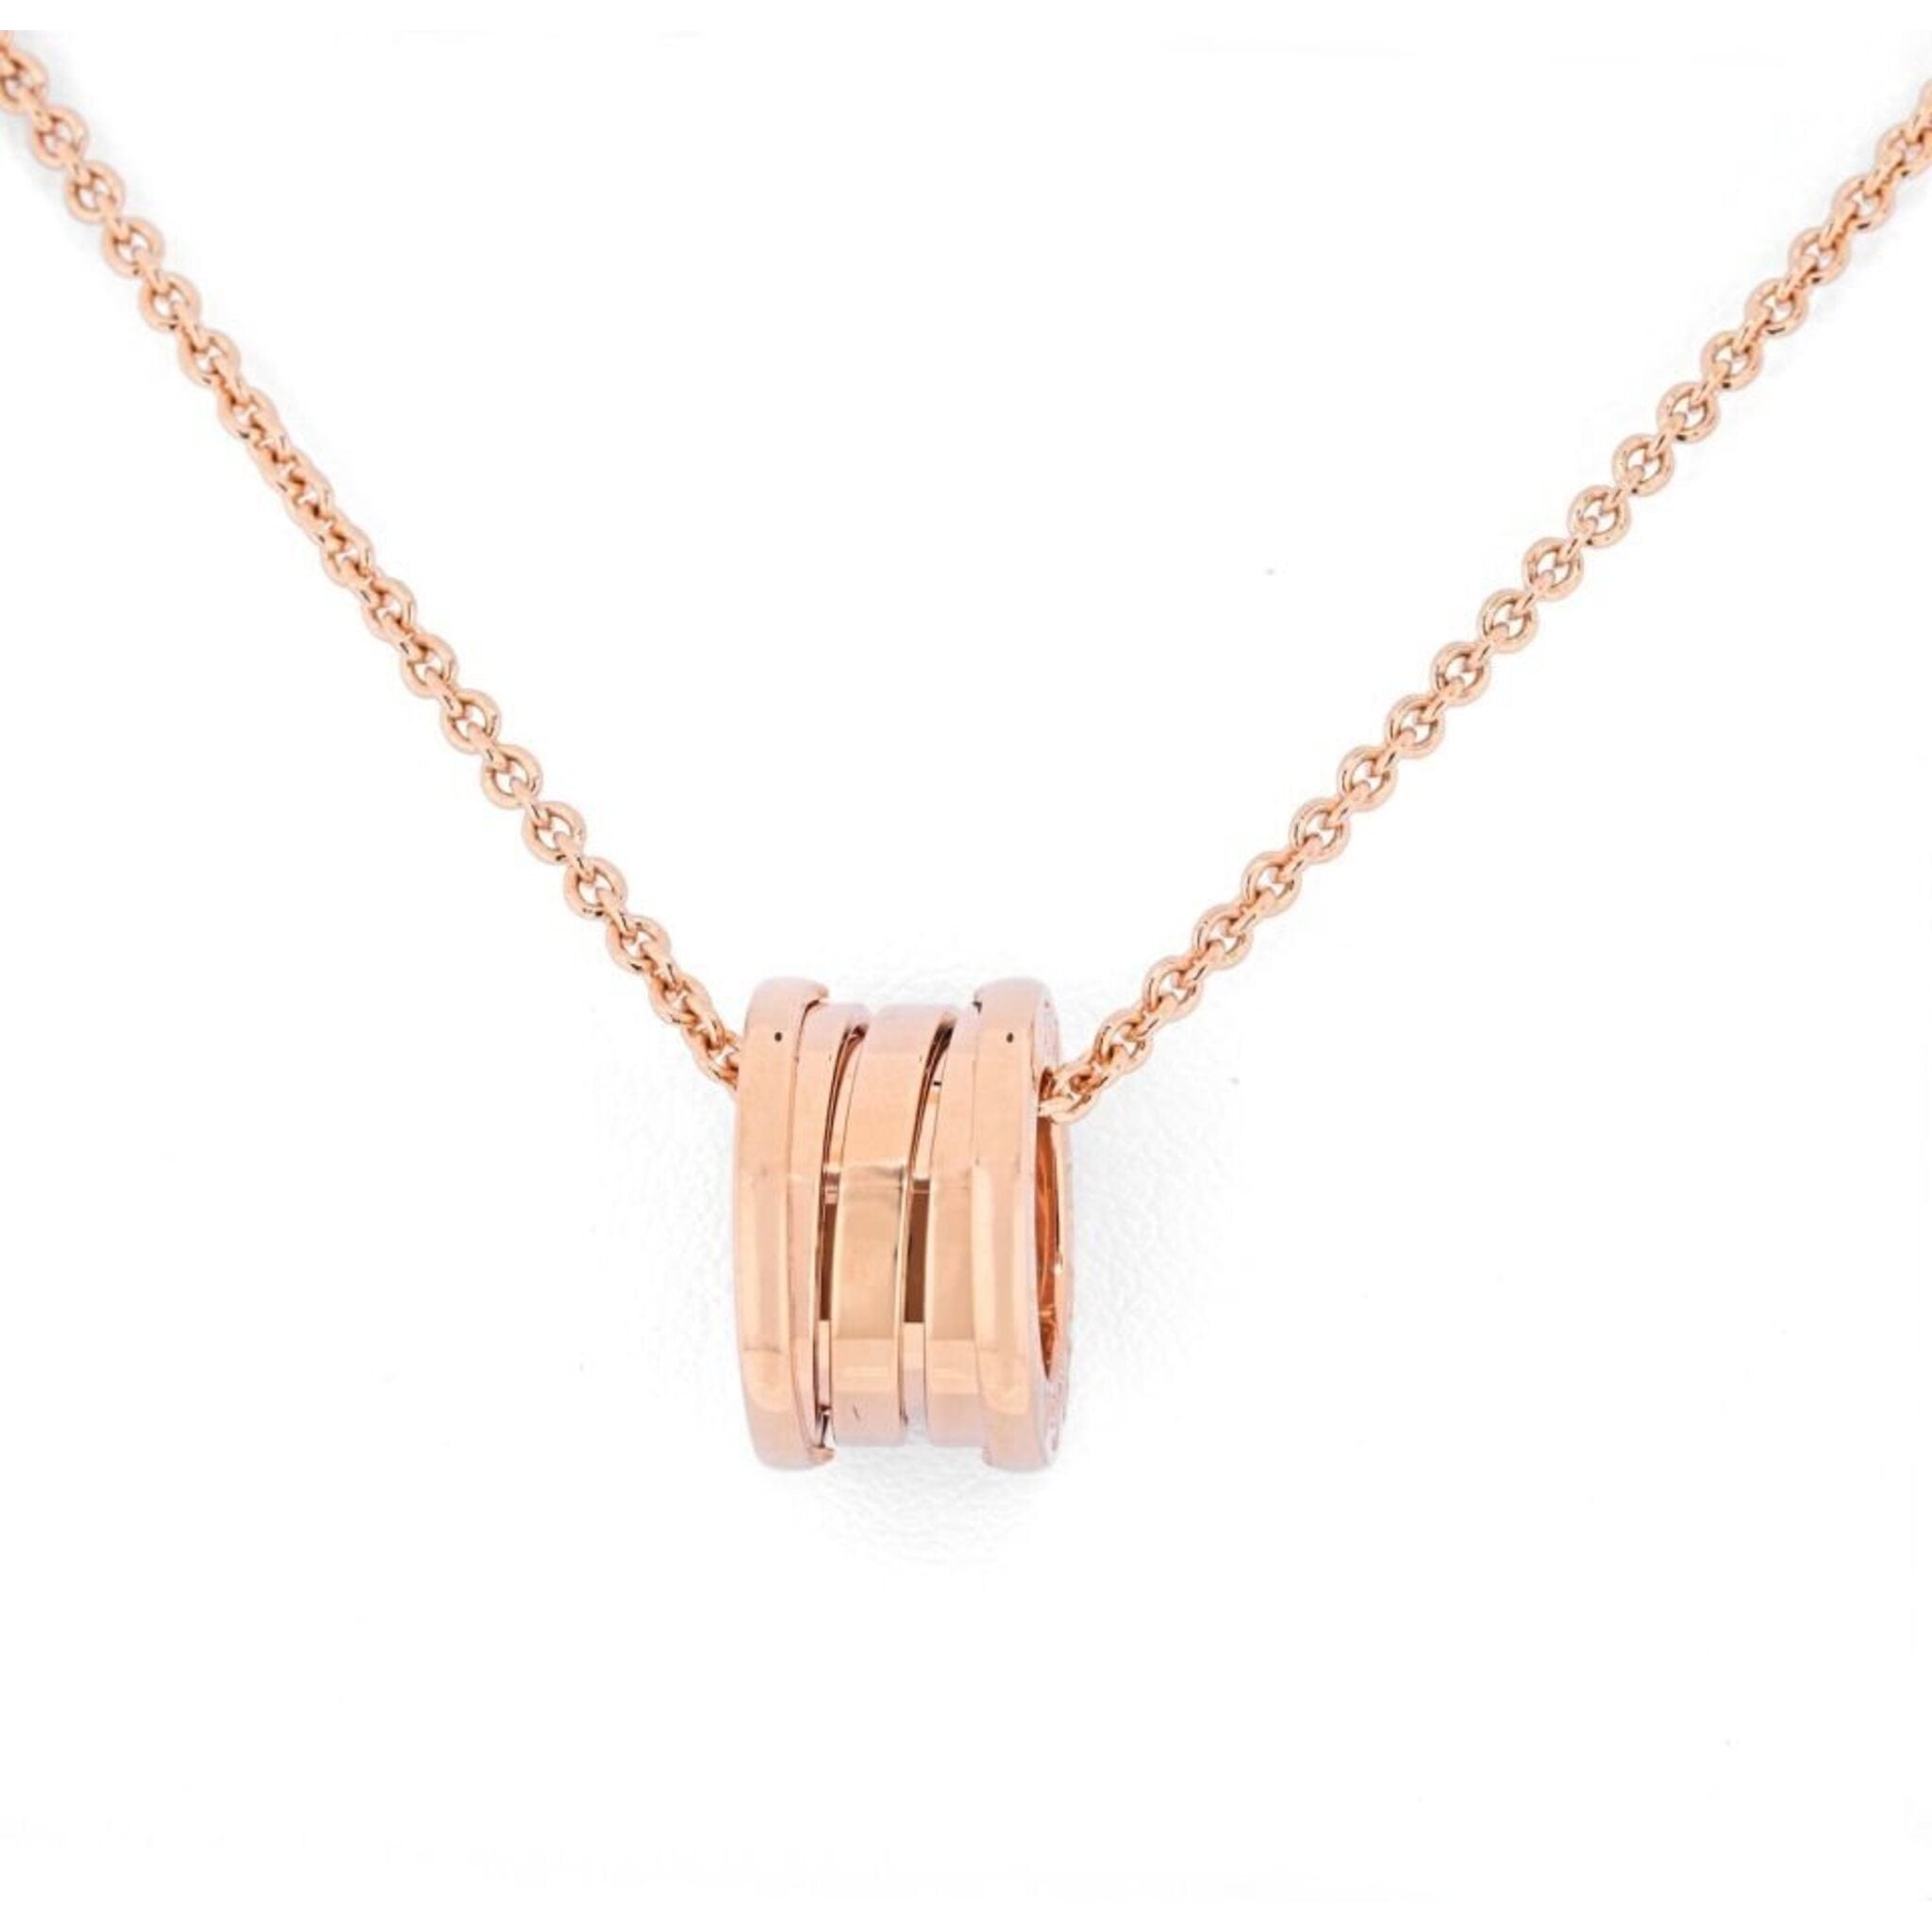 Bvlgari B.ZERO1 necklace with chain and small round pendant in 18KT rose  gold | Design Your Own Real 18K Gold and GIA Diamond Luxury Brand Jewelry  Custom Made